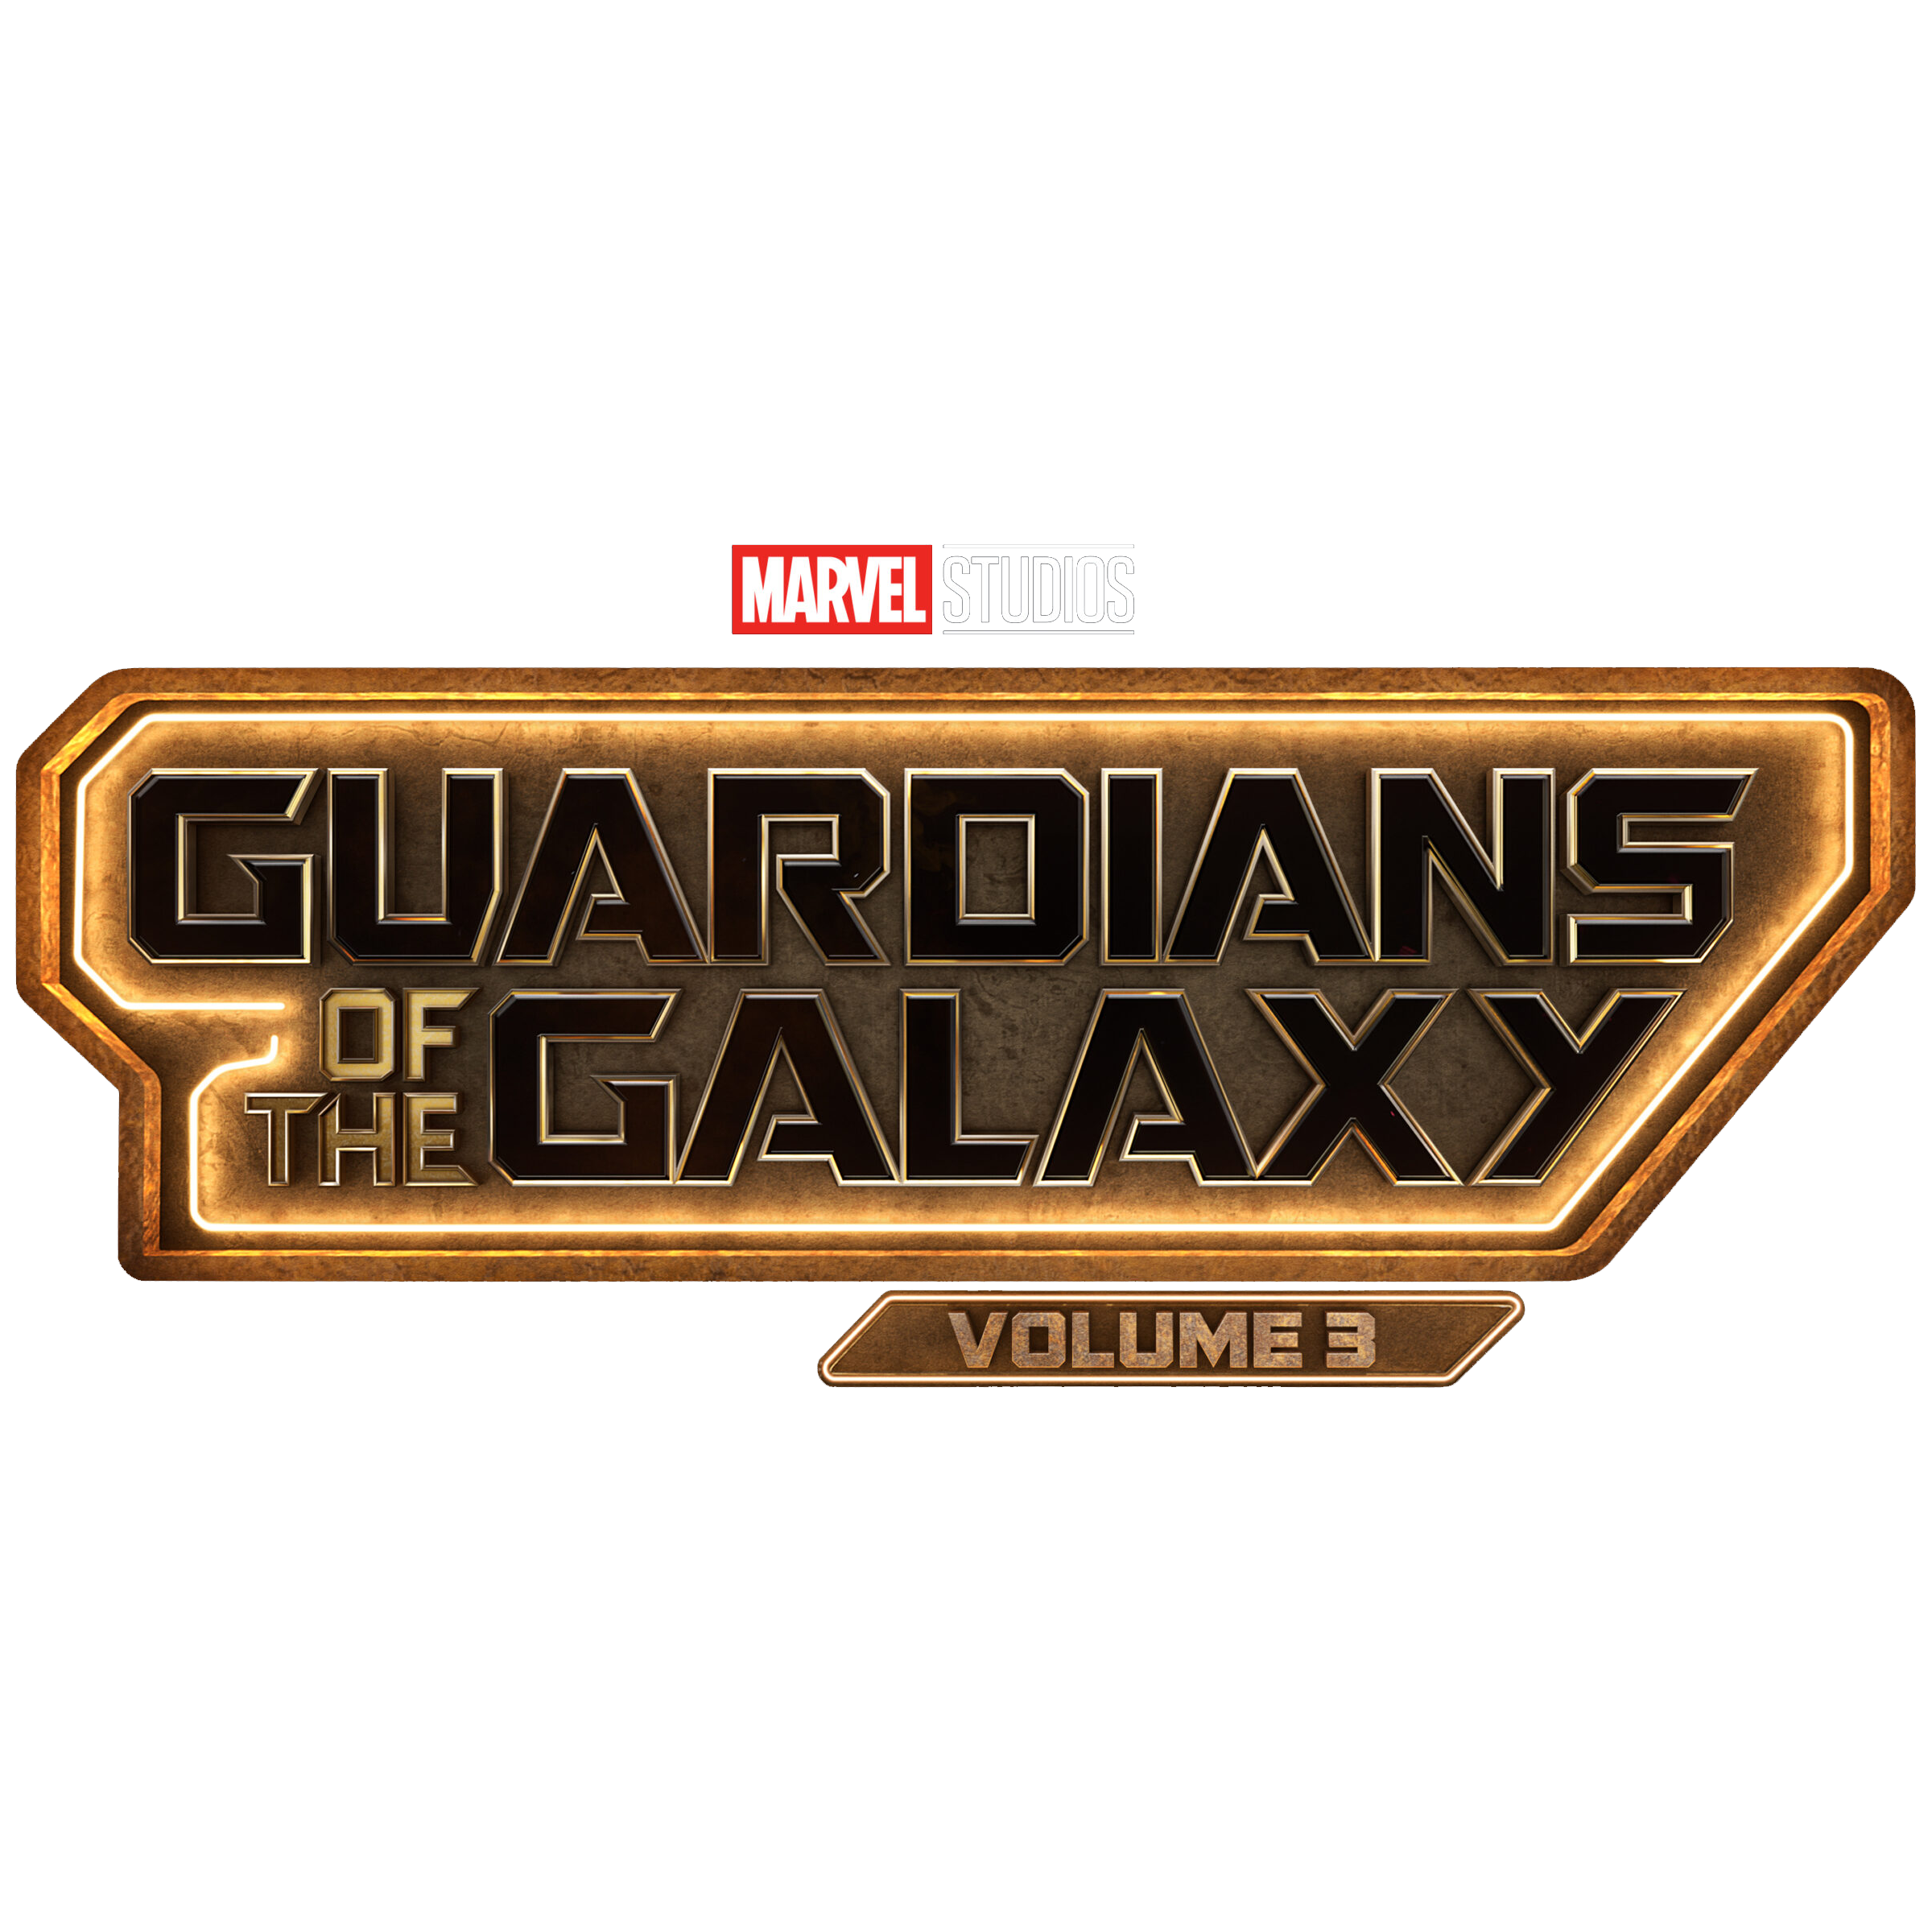 Guardians of the Galaxy Volume 3 Logo Transparent Image